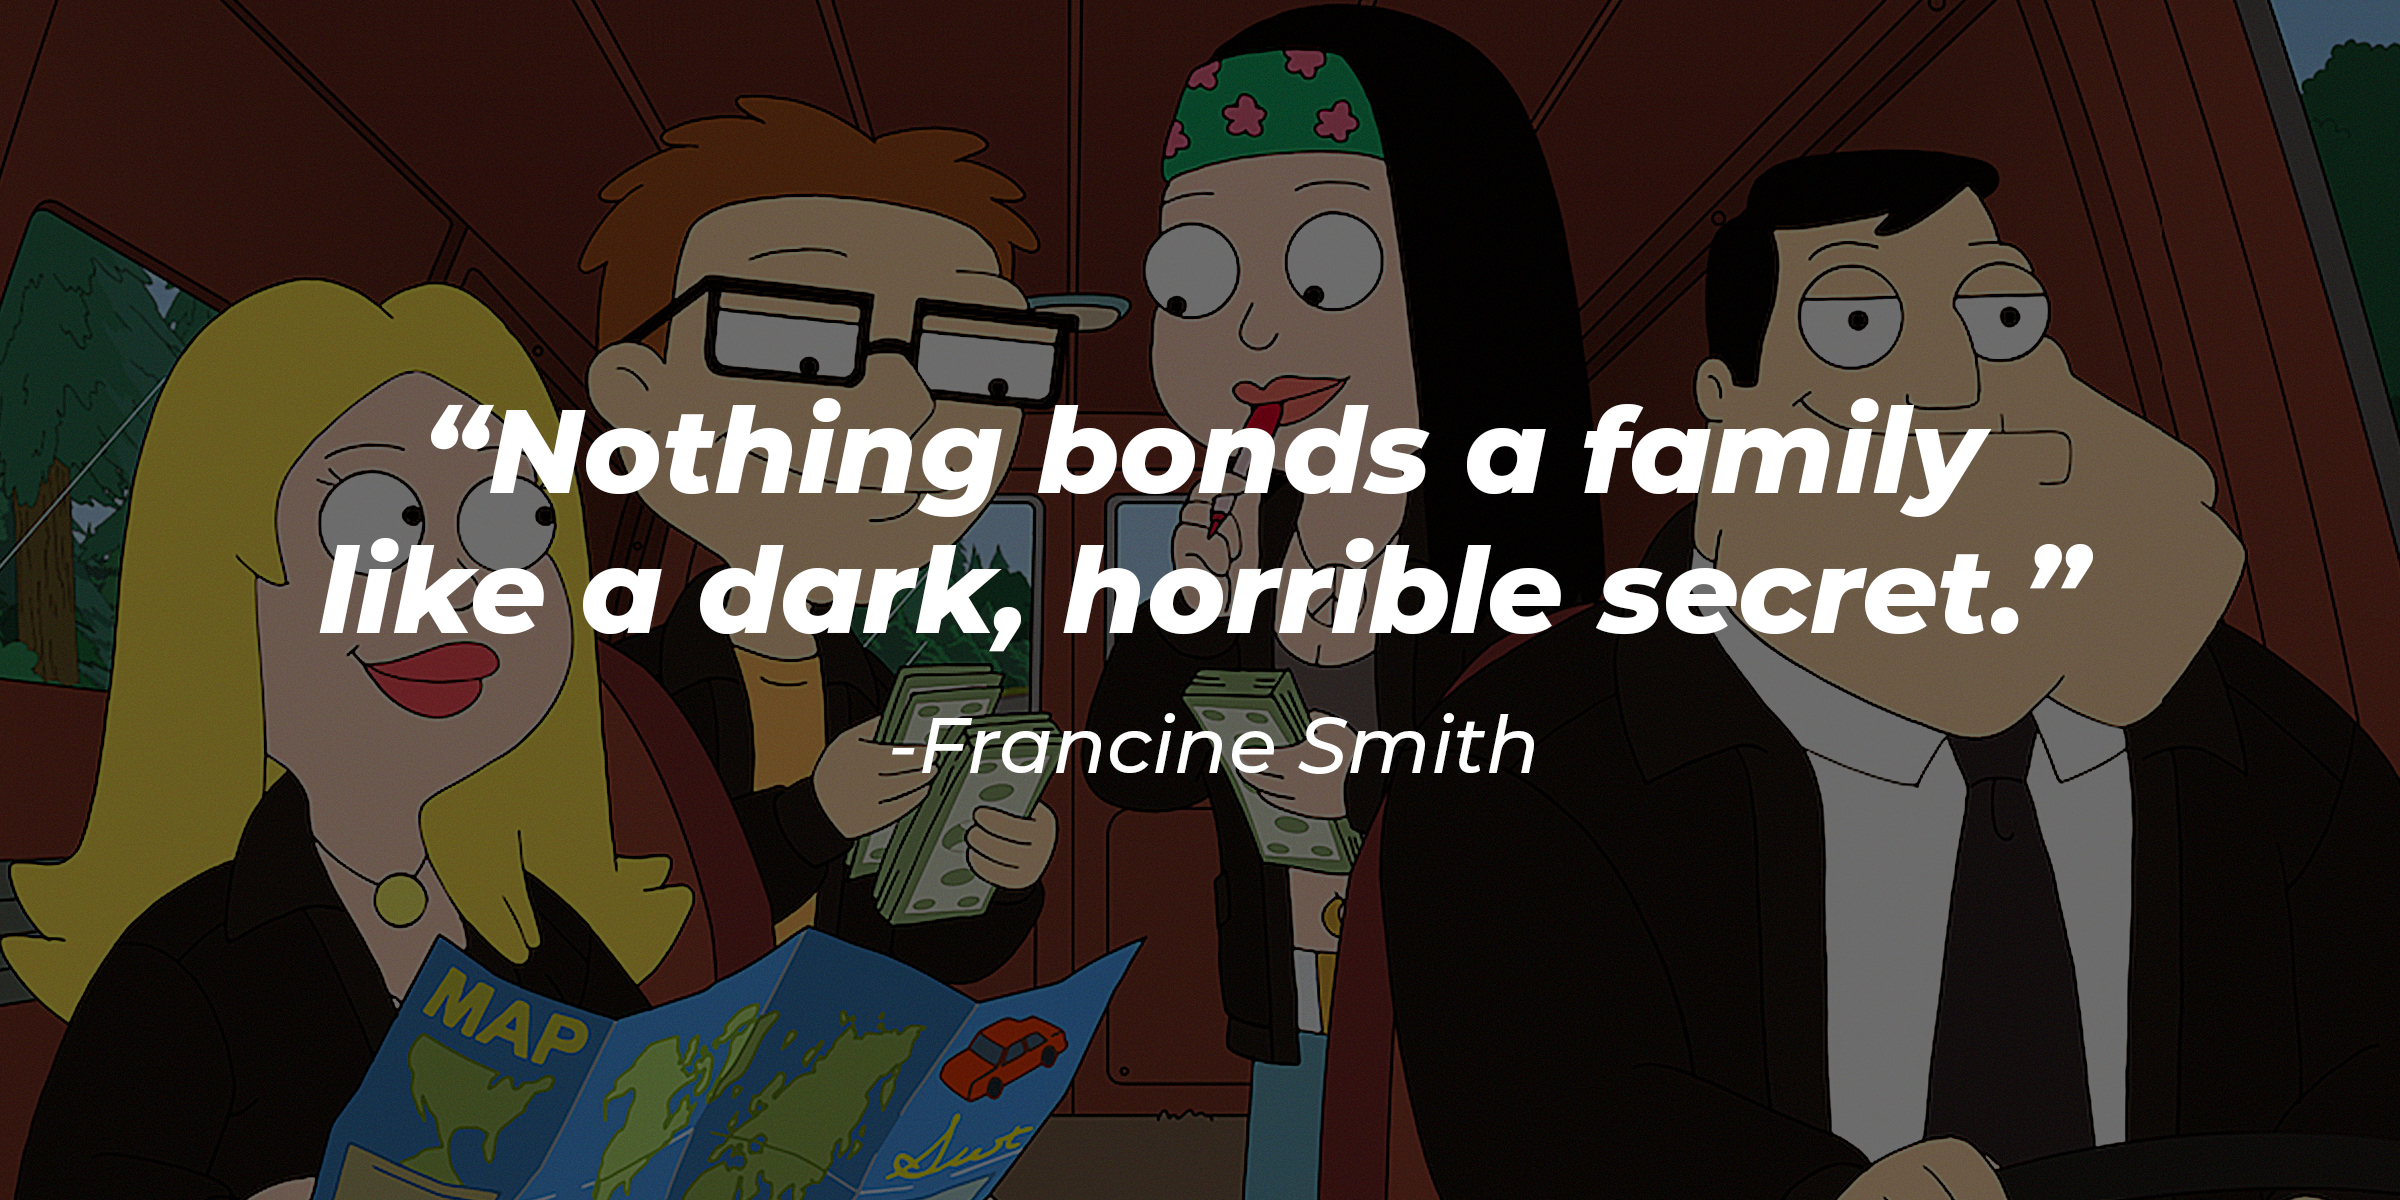 An image of the Smith family with Francine Smith's quote, "Nothing bonds a family like a dark, horrible secret." | Source: facebook.com/AmericanDad